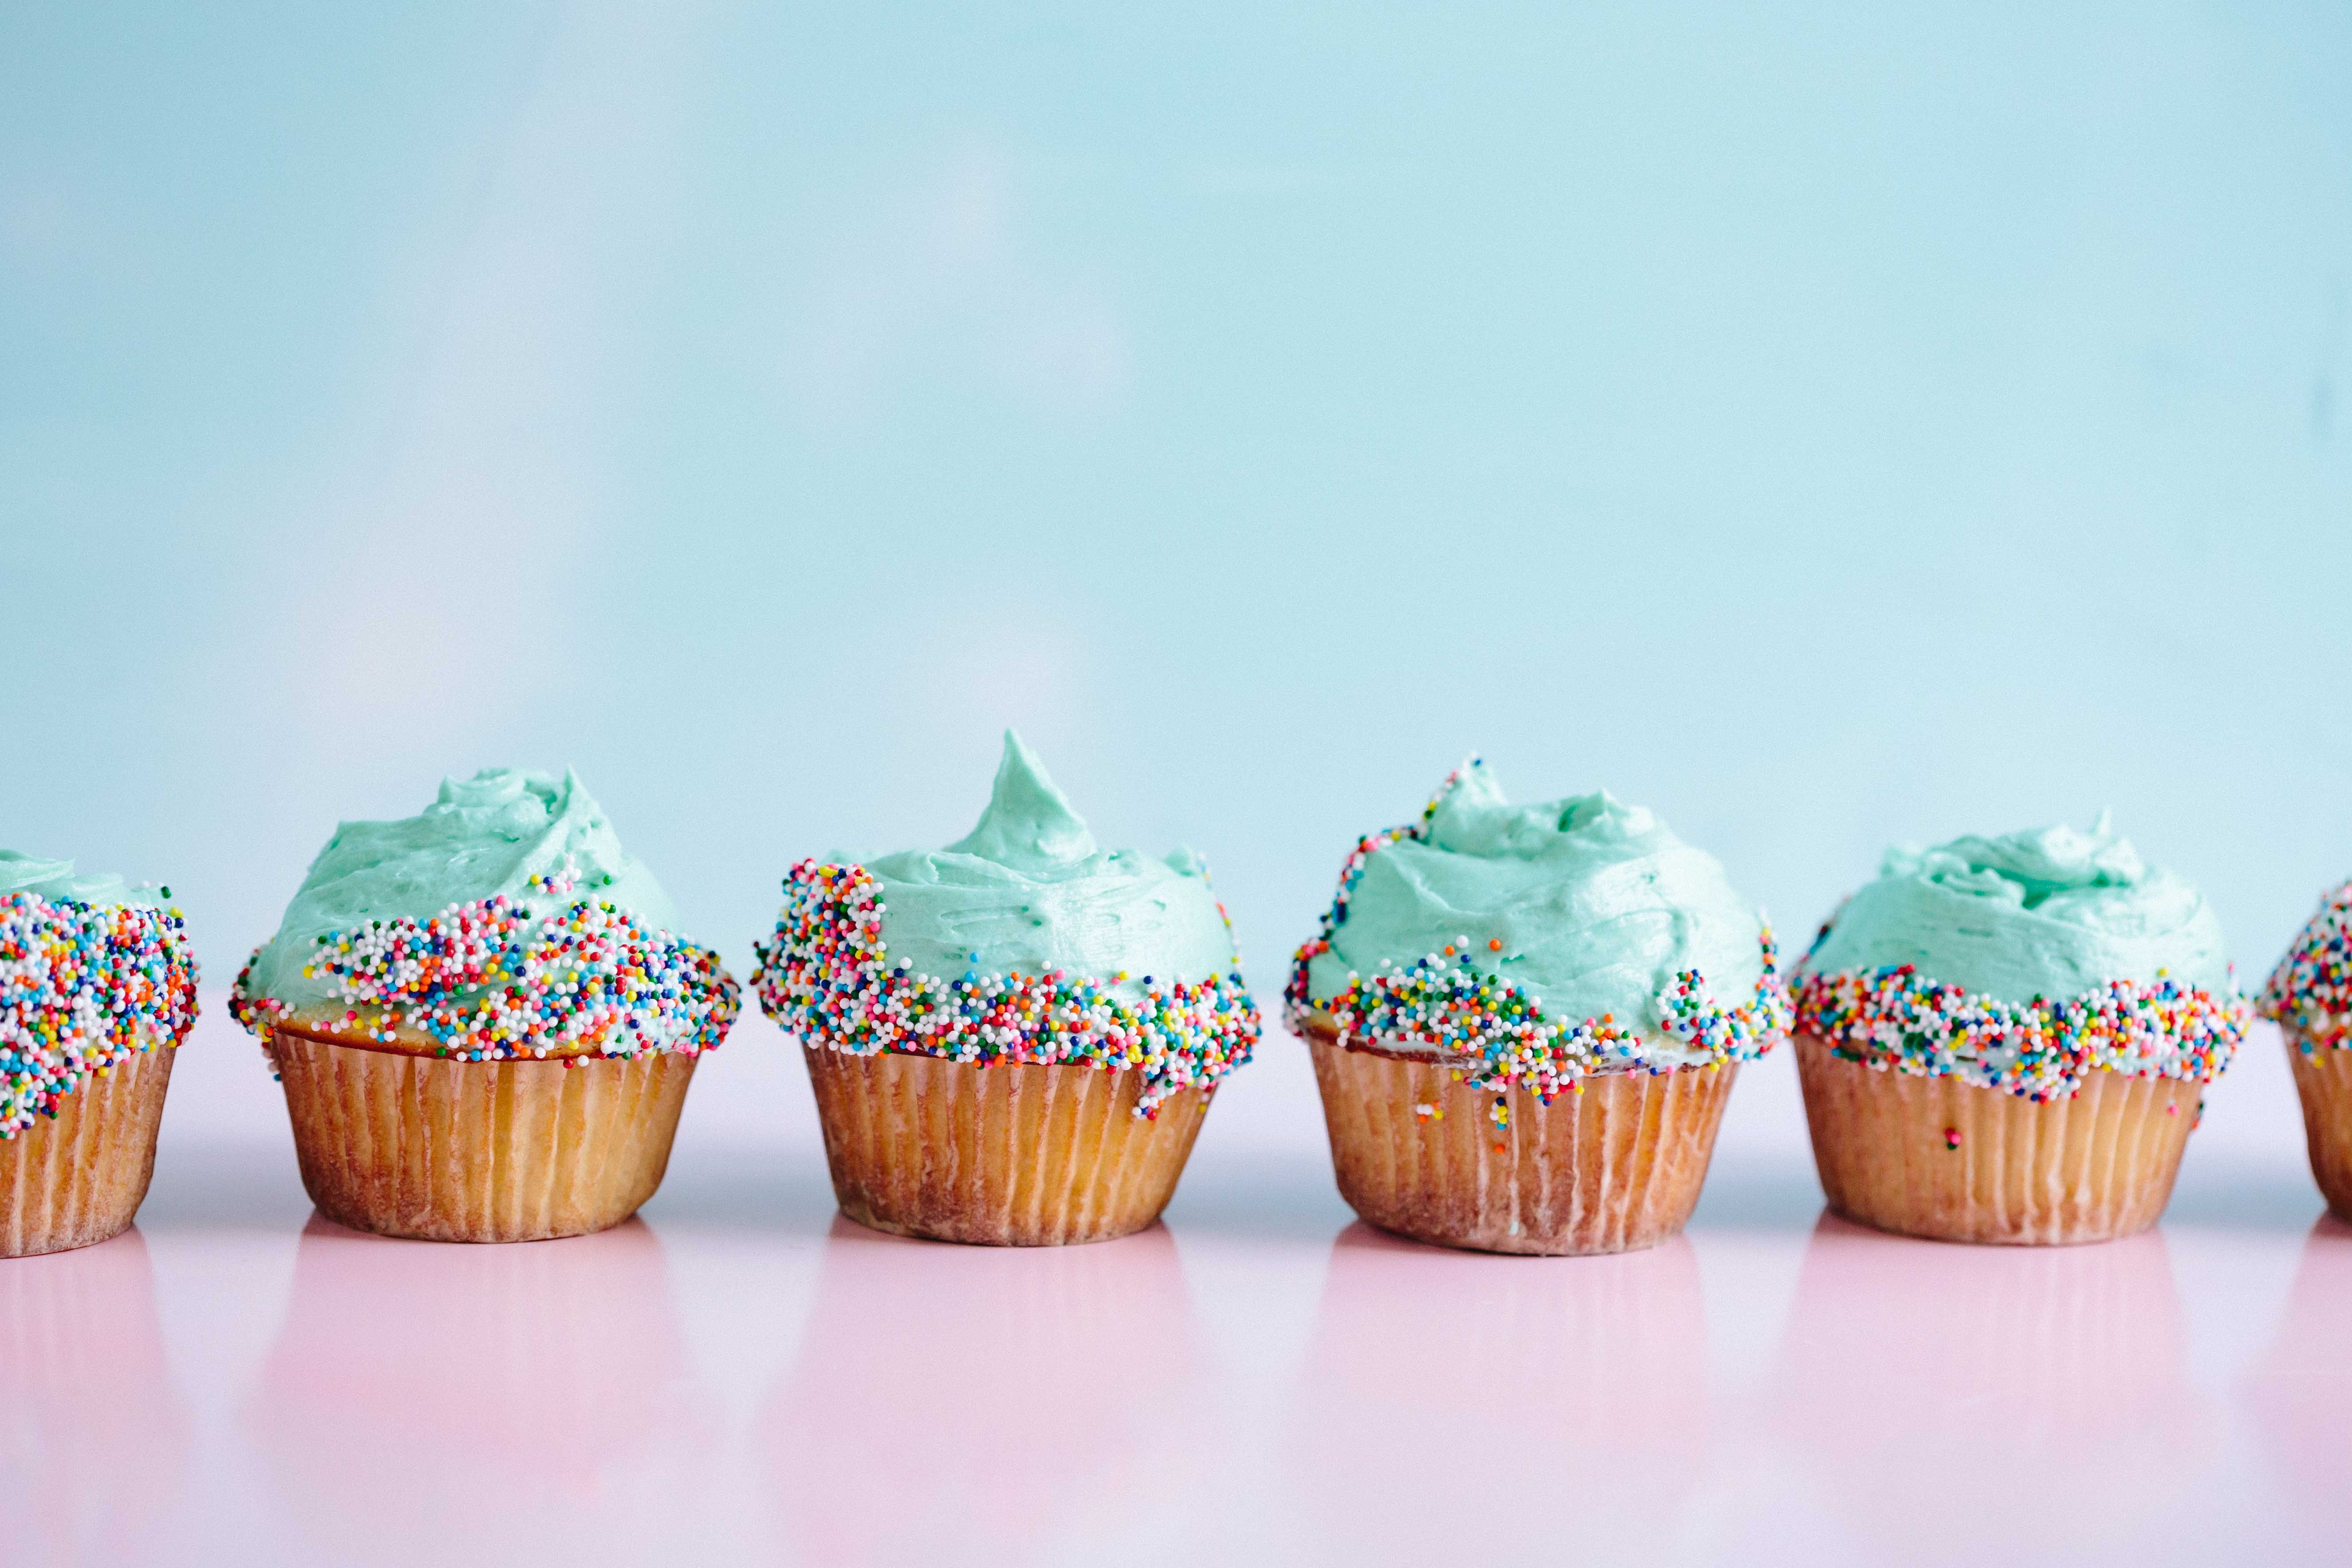 A row of vanilla cupcakes with mint green icing and sprinkles on top.